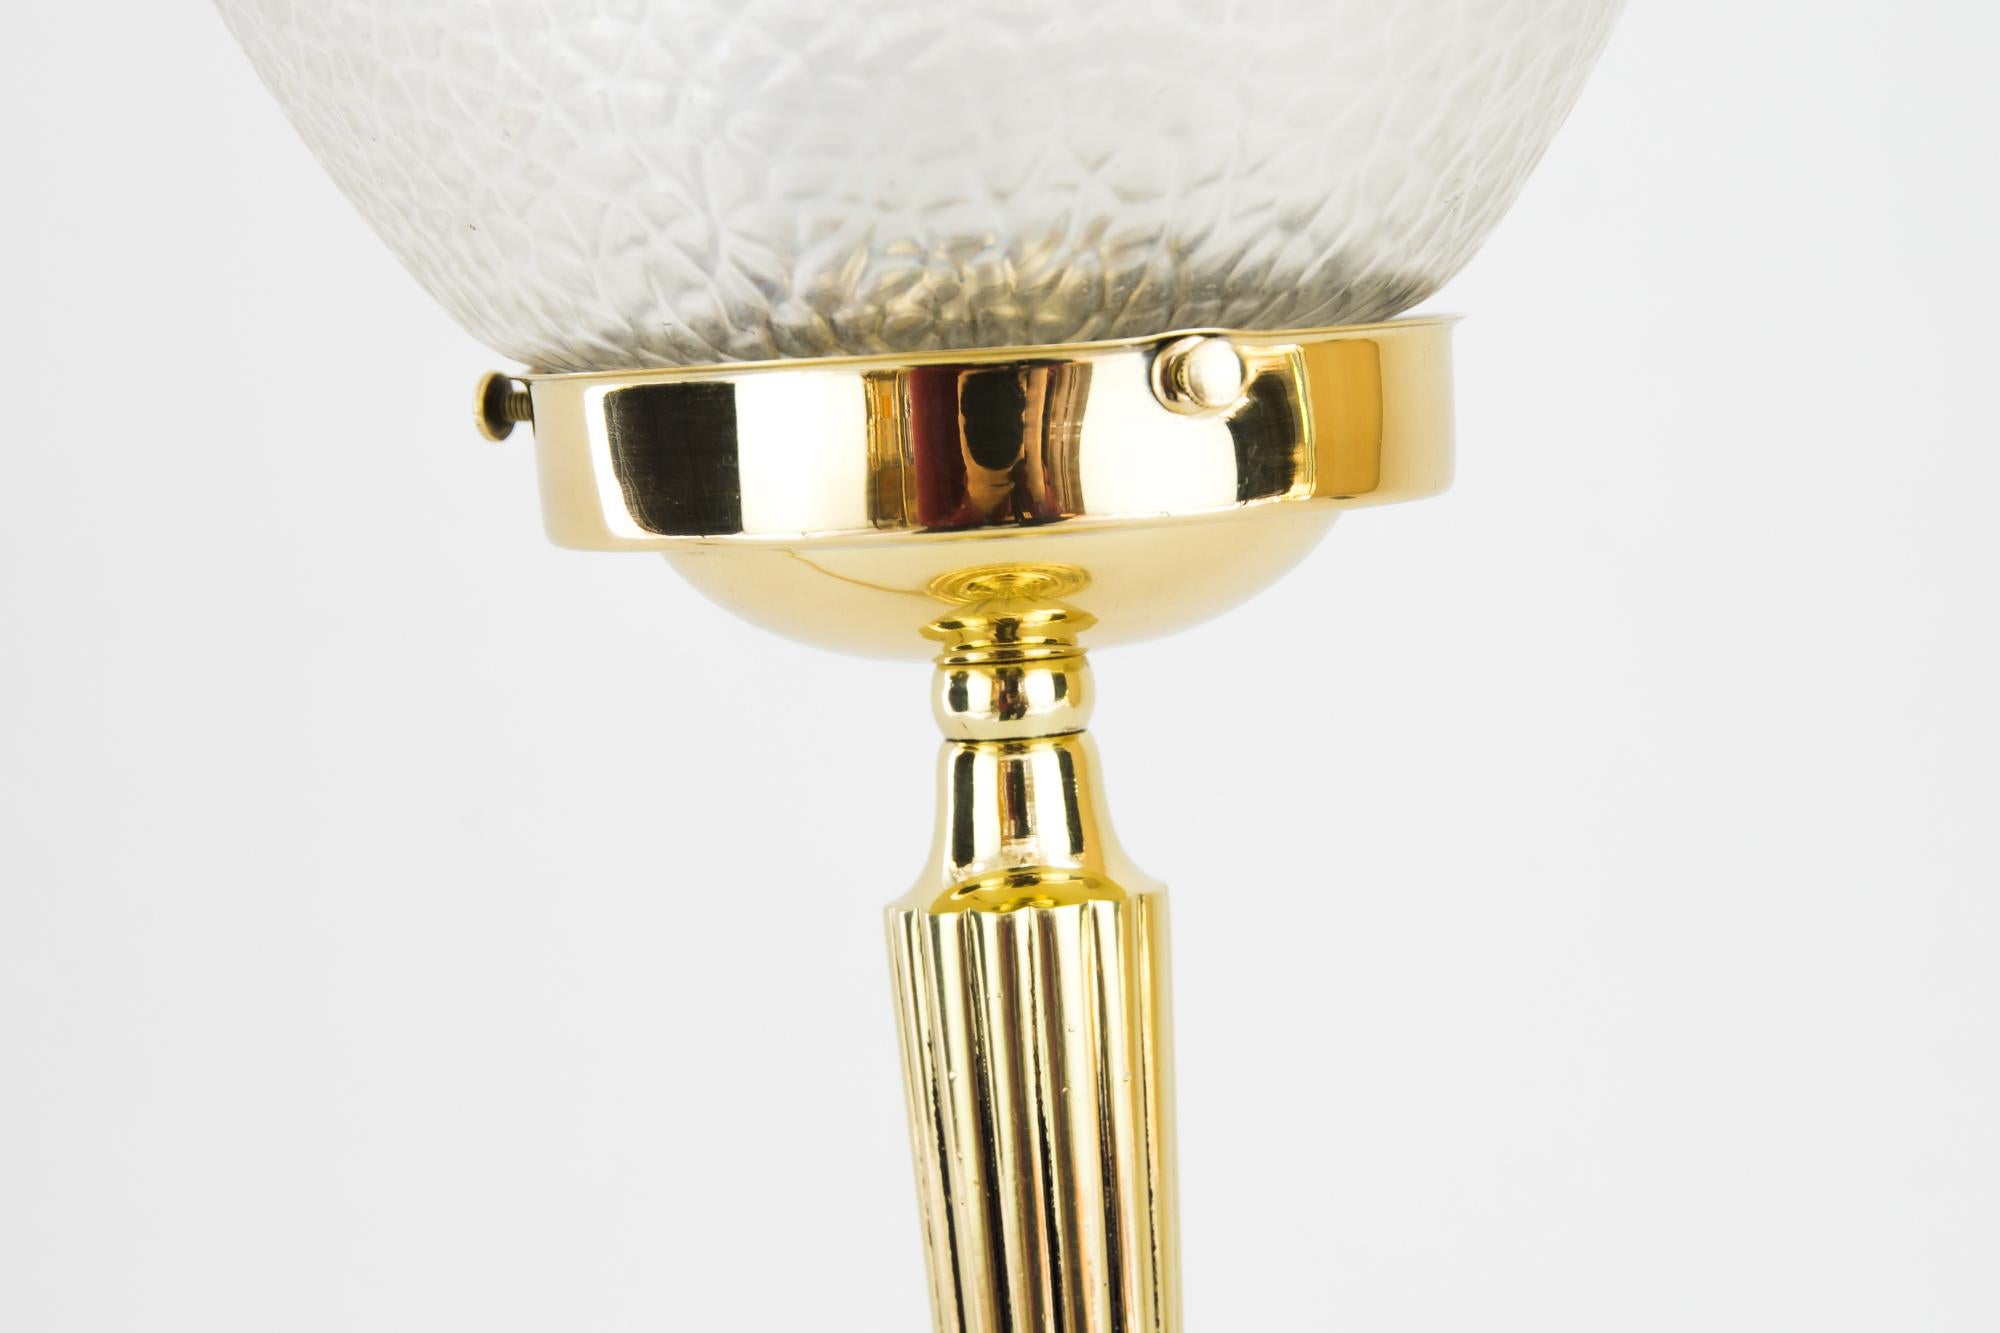 Early 20th Century Art Deco Table Lamp with Original Glass Shade, Vienna, circa 1920s